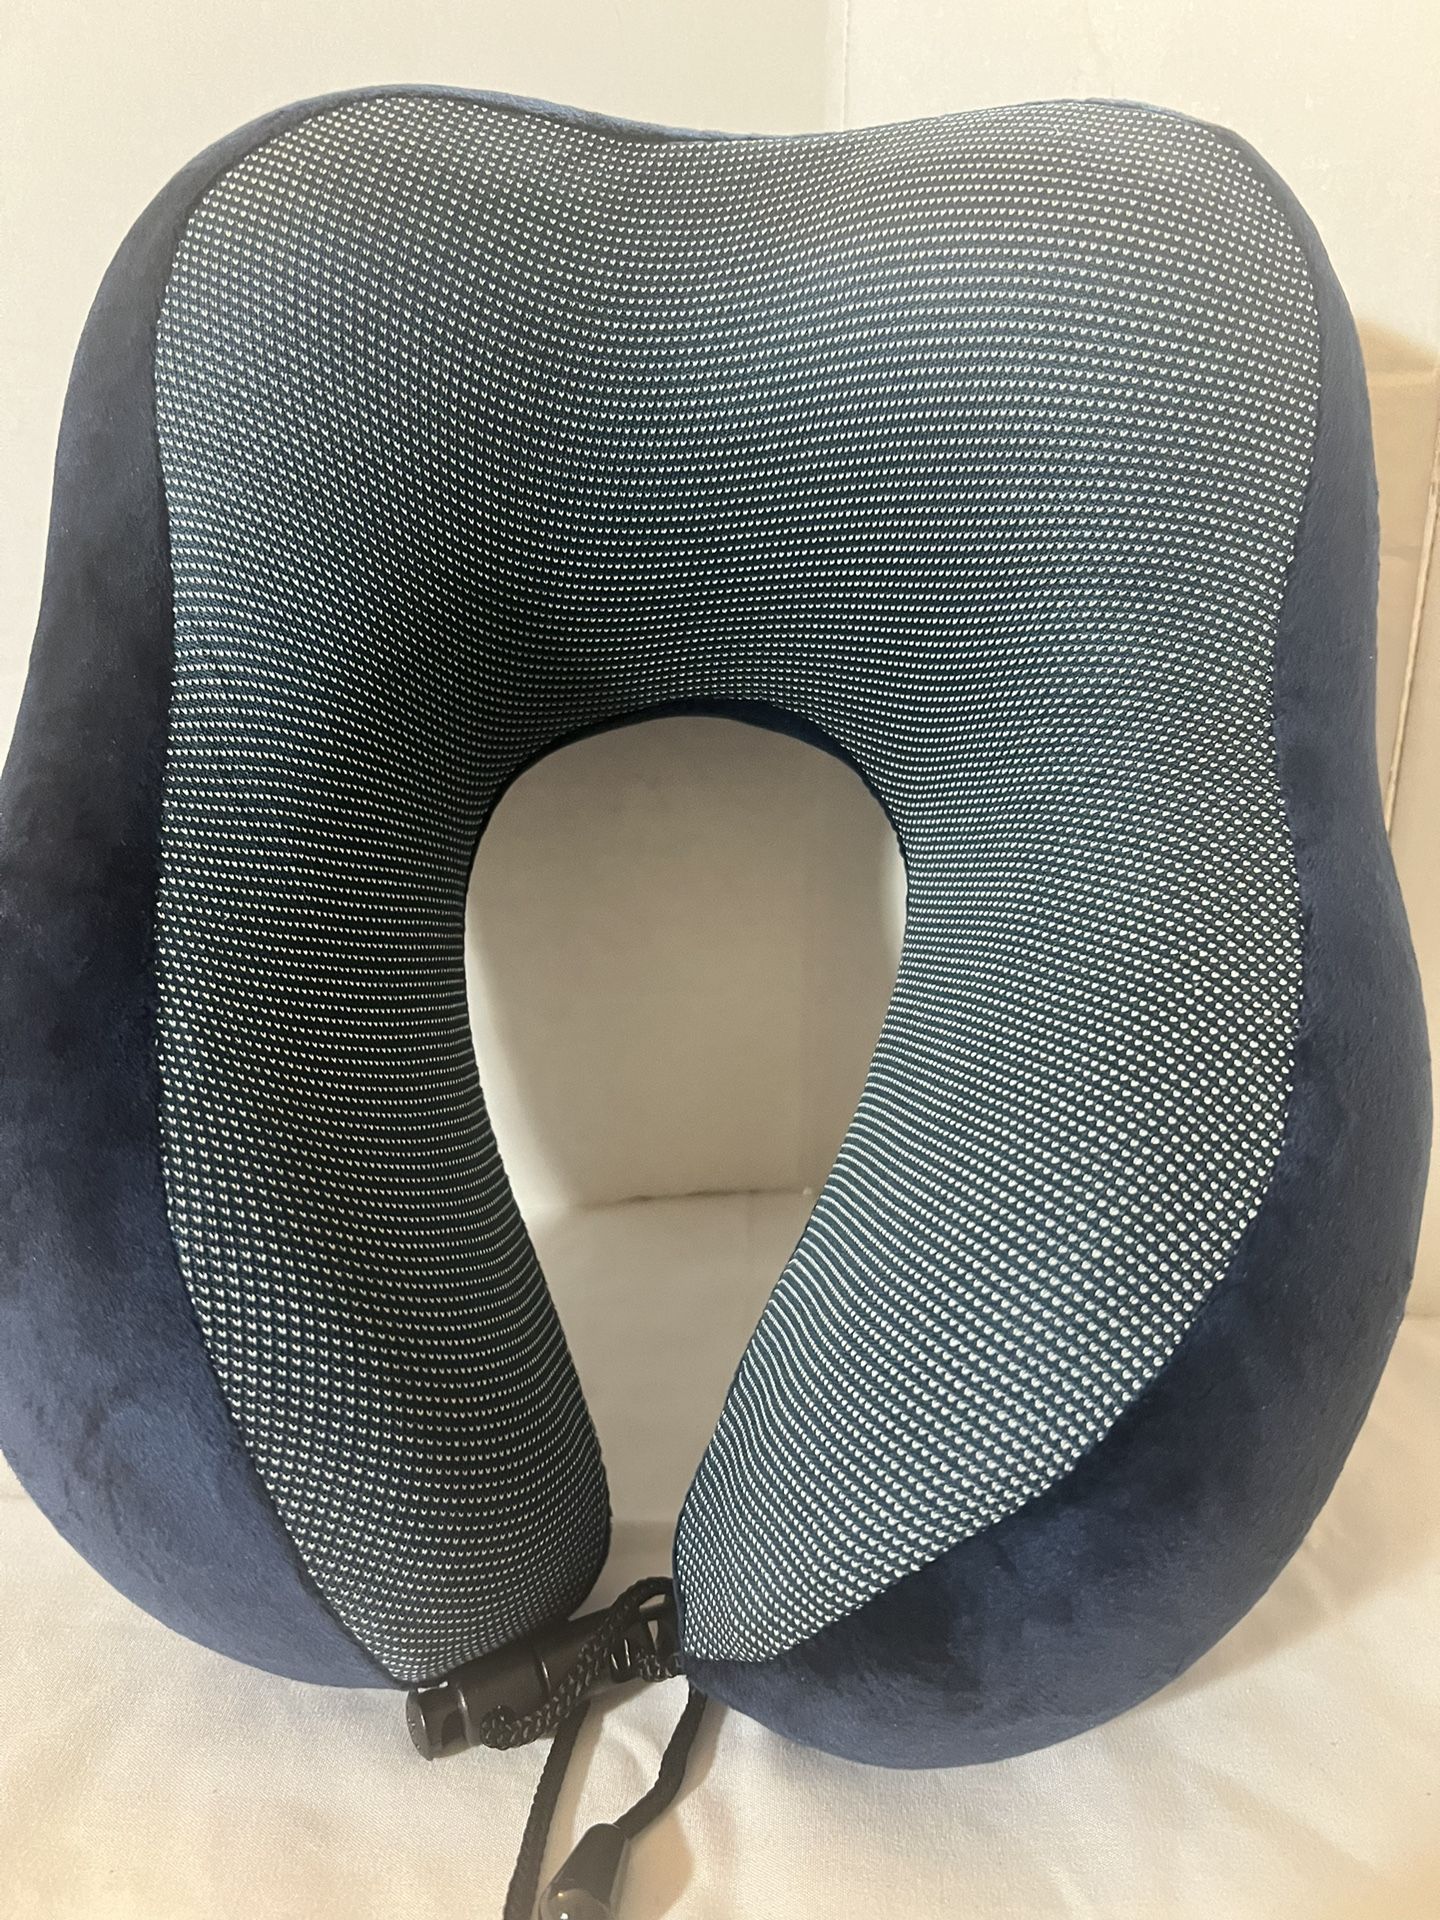 Travel Pillow Pure Memory Foam Neck Comfortable & Breathable Cover - Machine Washable Soft Pillow for Sleeping Rest, Airplane Car & Home Use (Dark Blu